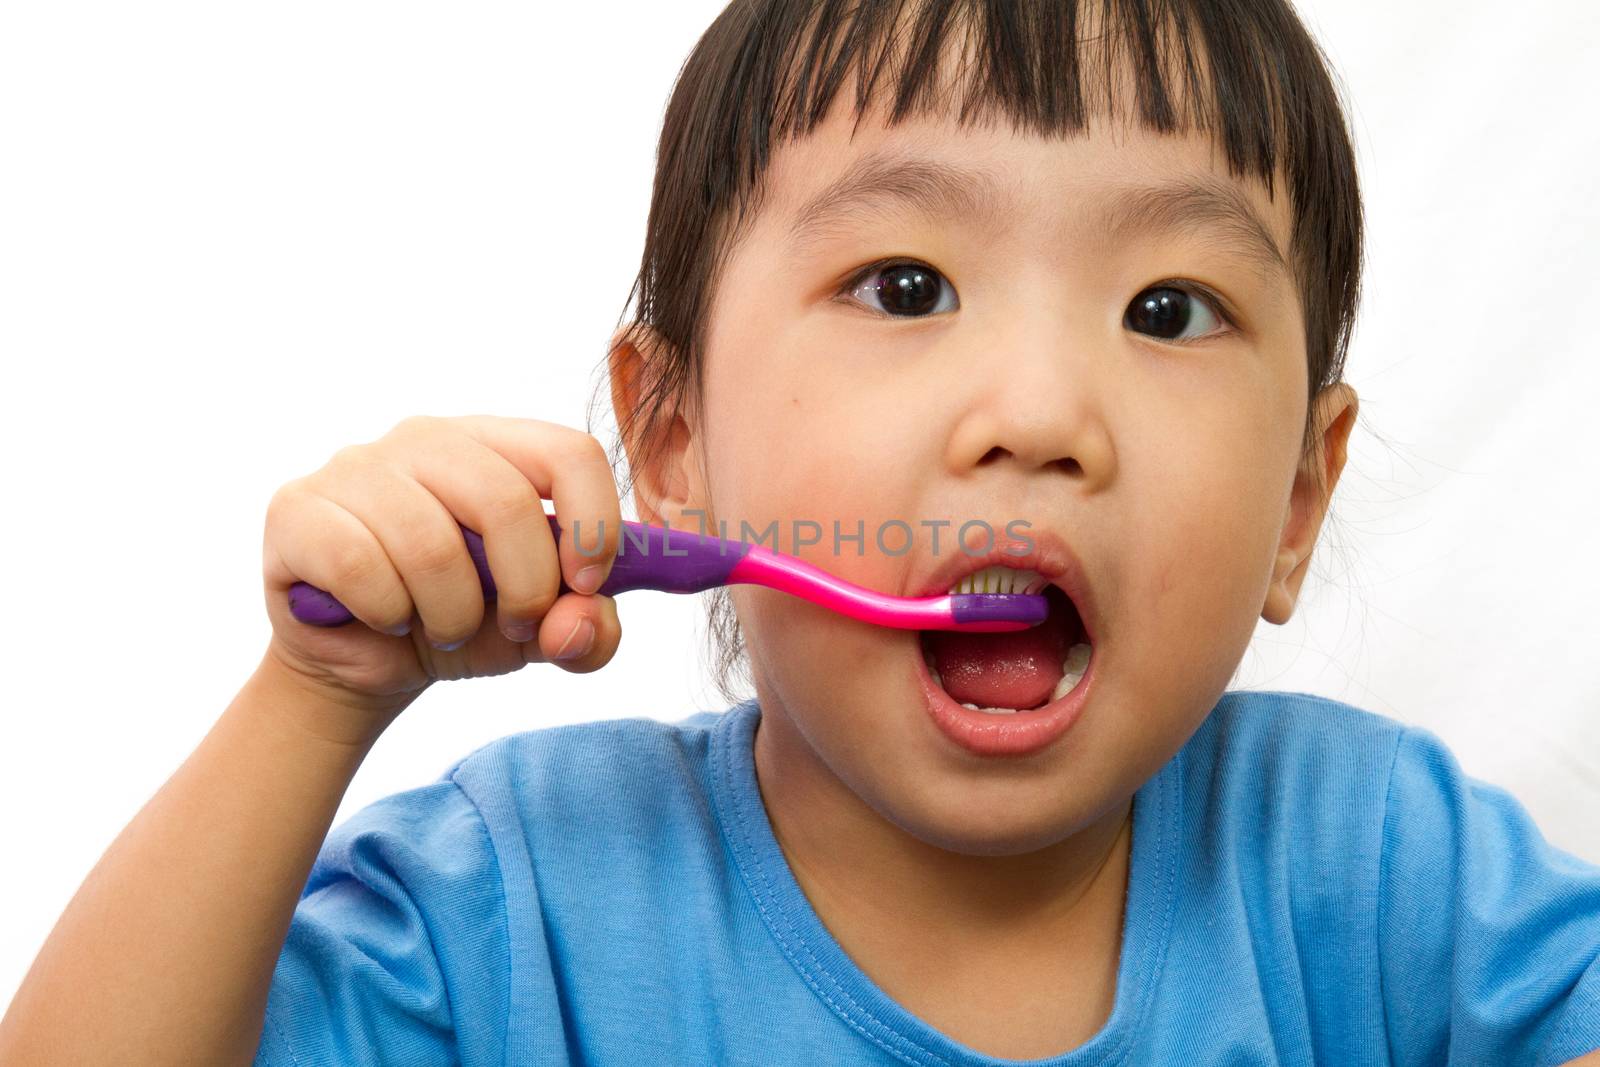 Chinese little girl brushing teeth in plain white isolated background.